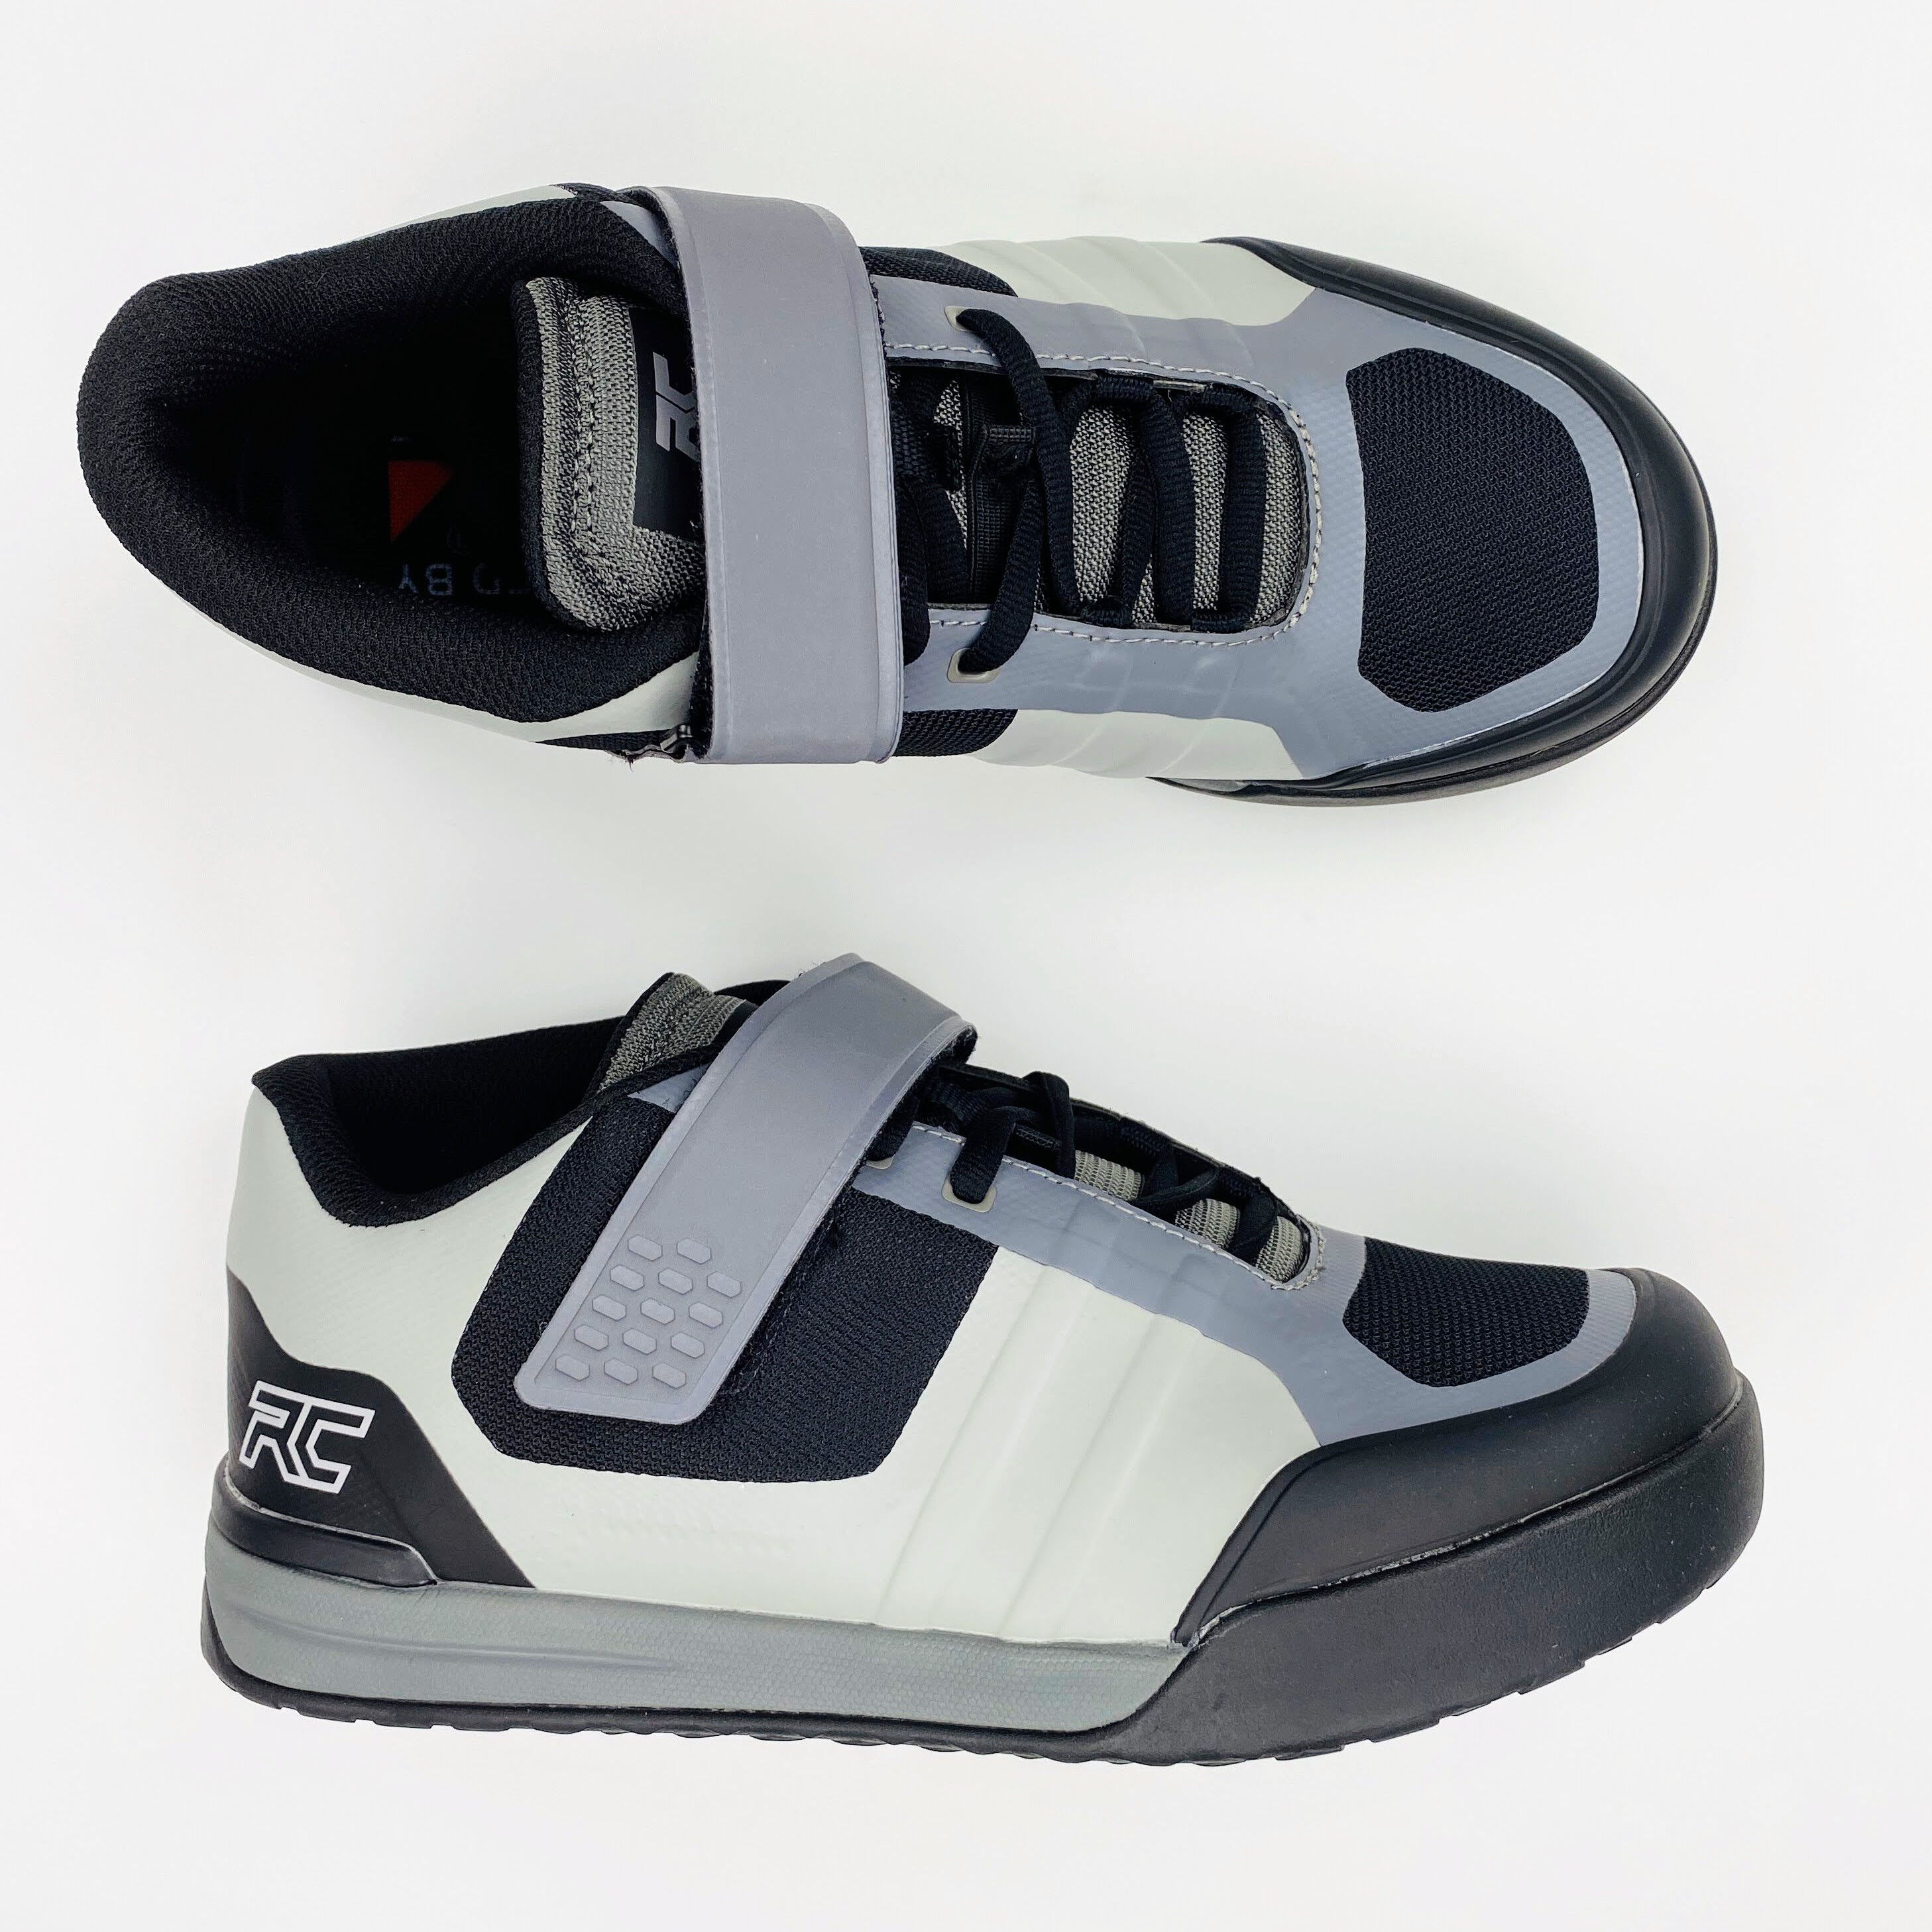 Ride Concepts Transition Clip - Seconde main Chaussures vélo homme - Gris - 43 | Hardloop